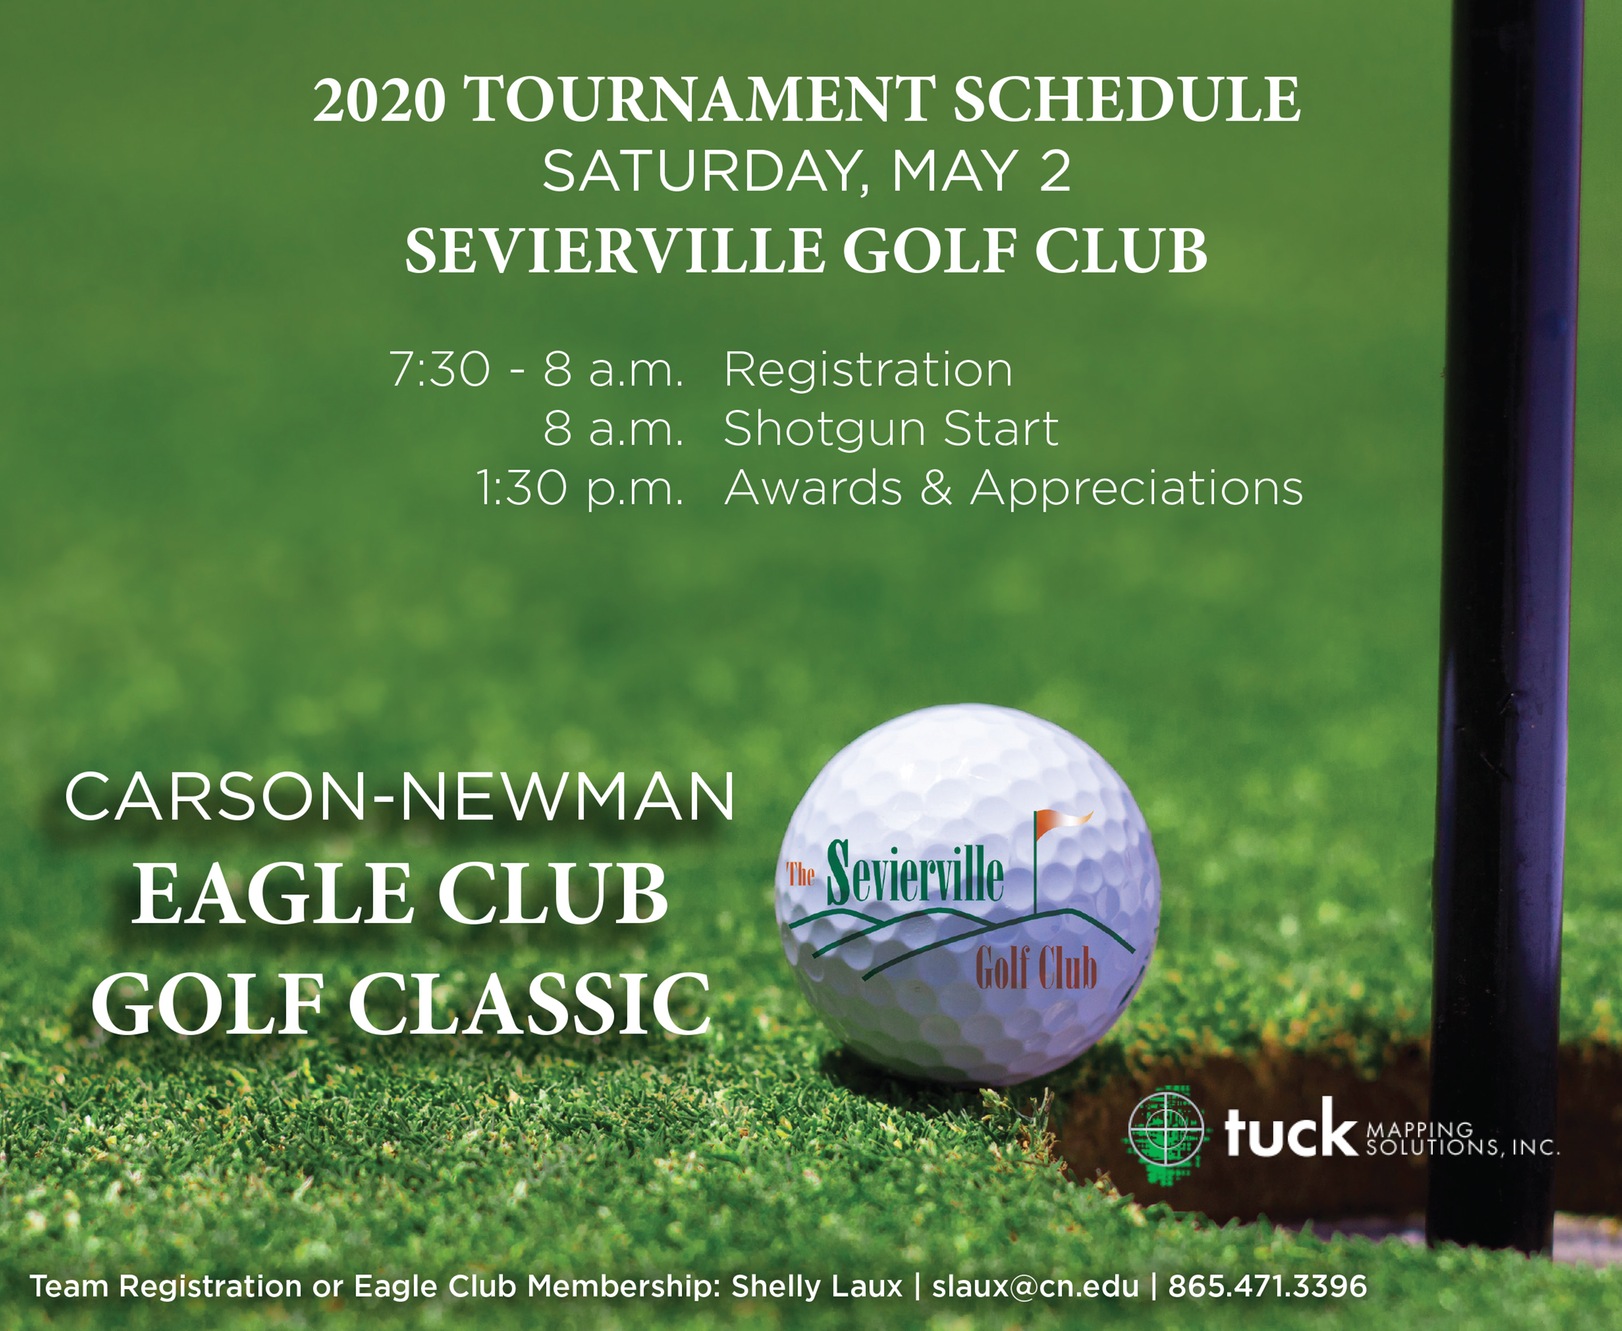 Eagle Club Golf Classic set for May 2